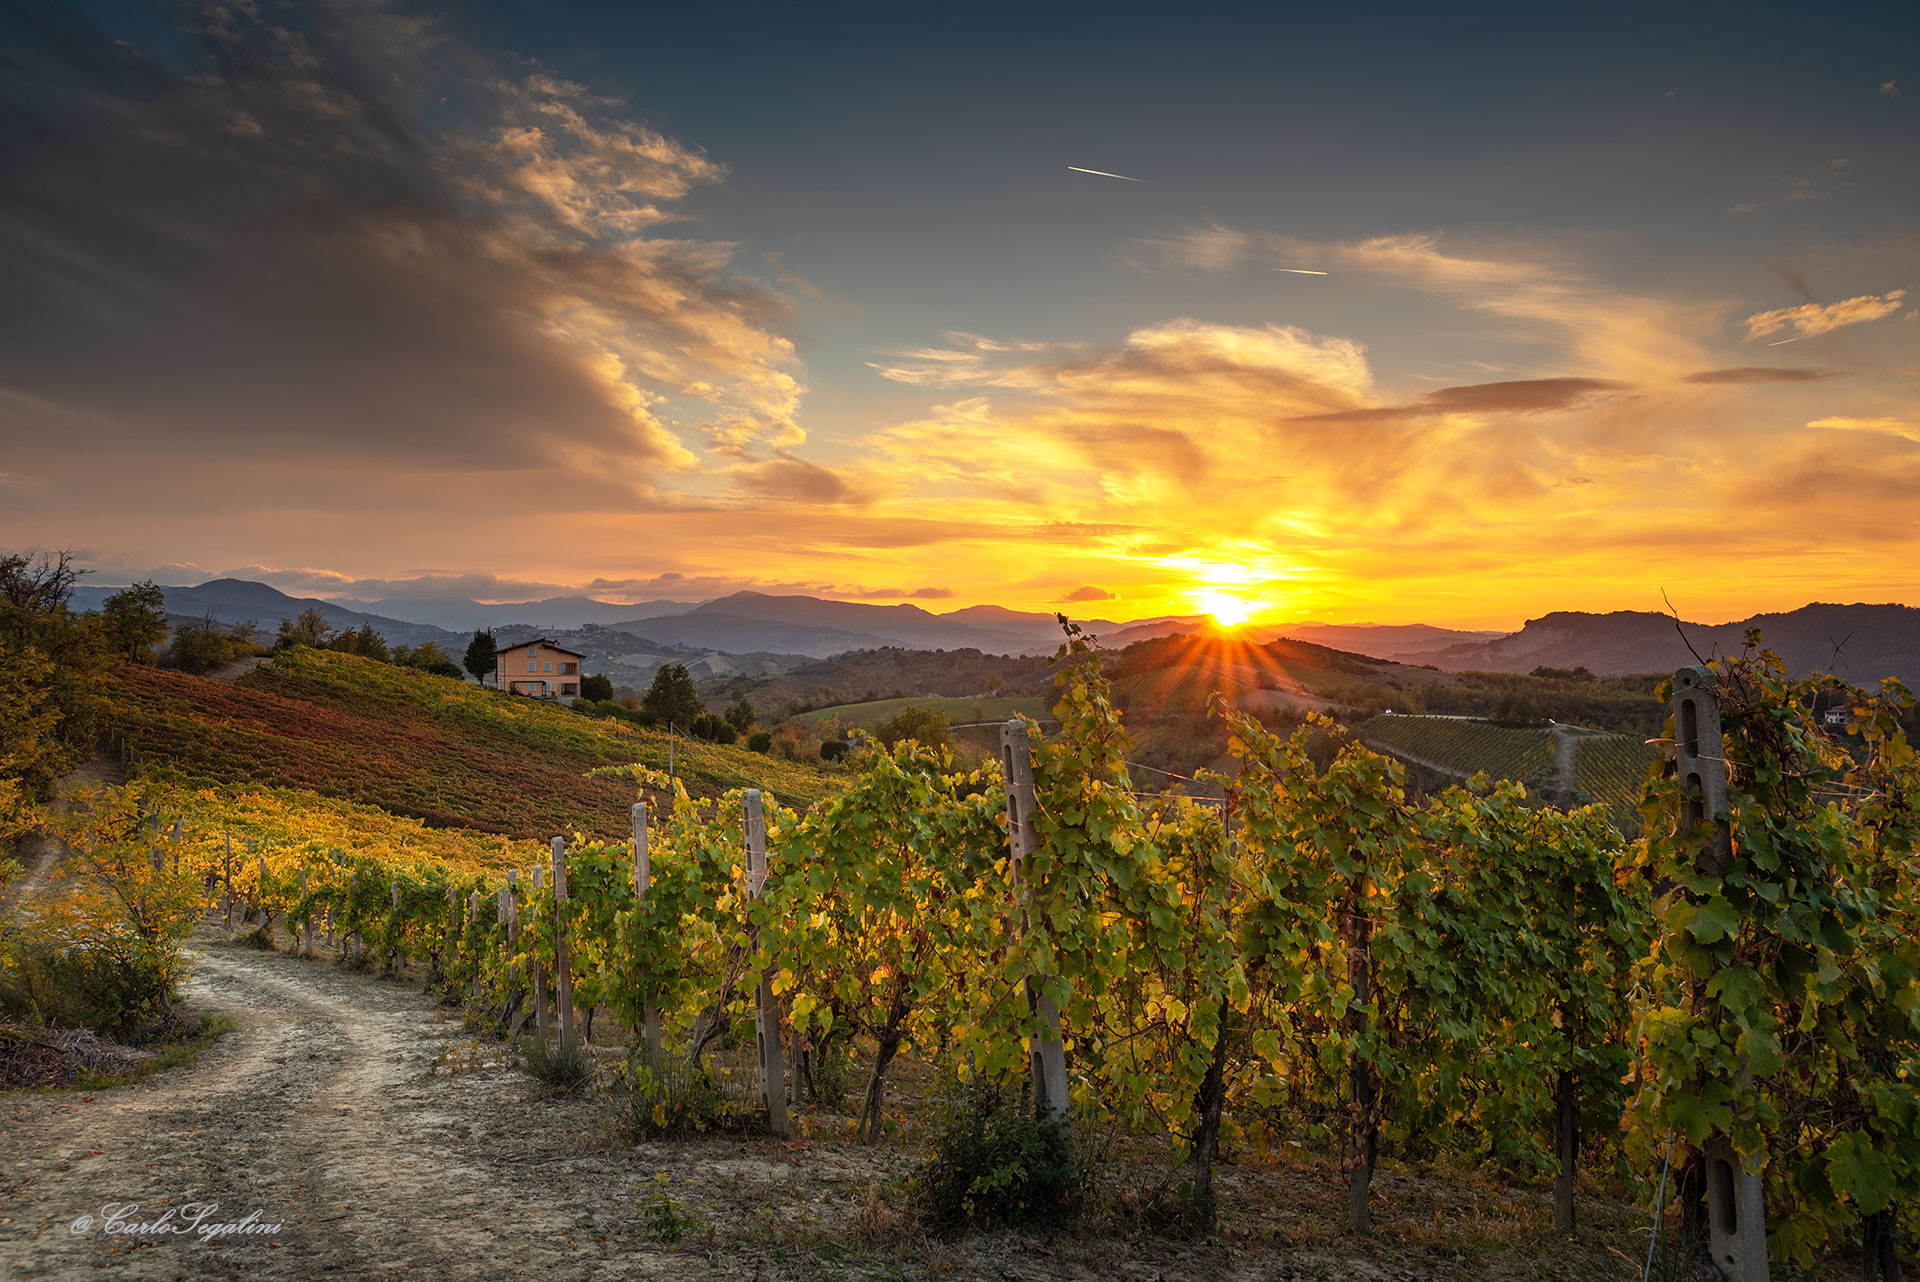 Sunset over the vineyards...